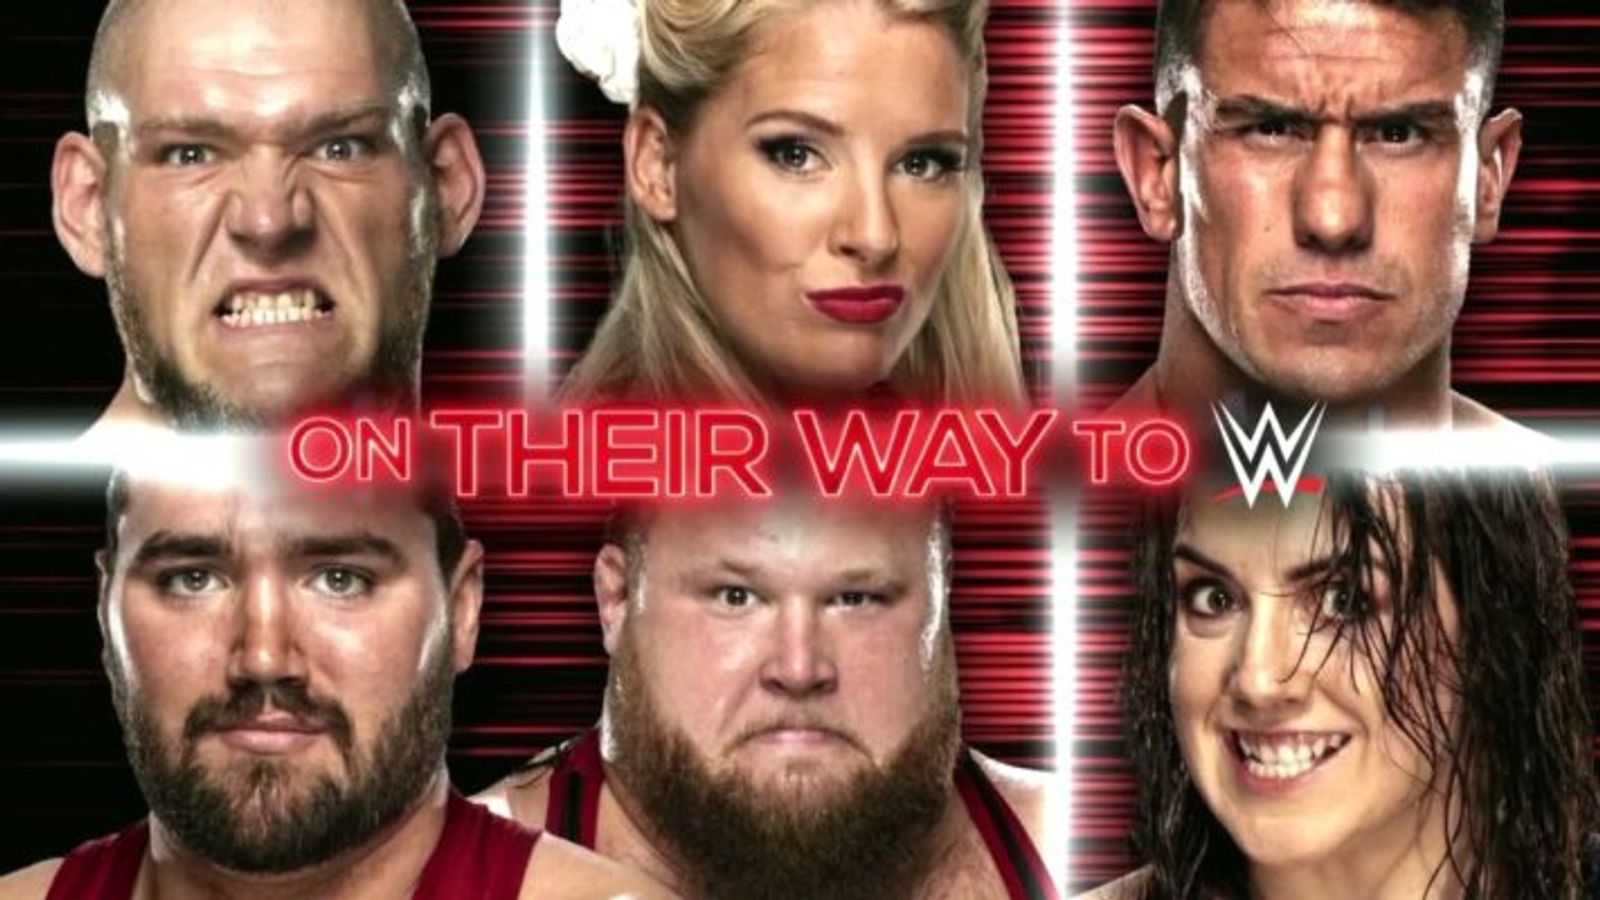 WWE Raw Six new signings made as part of Vince McMahon's shakeup